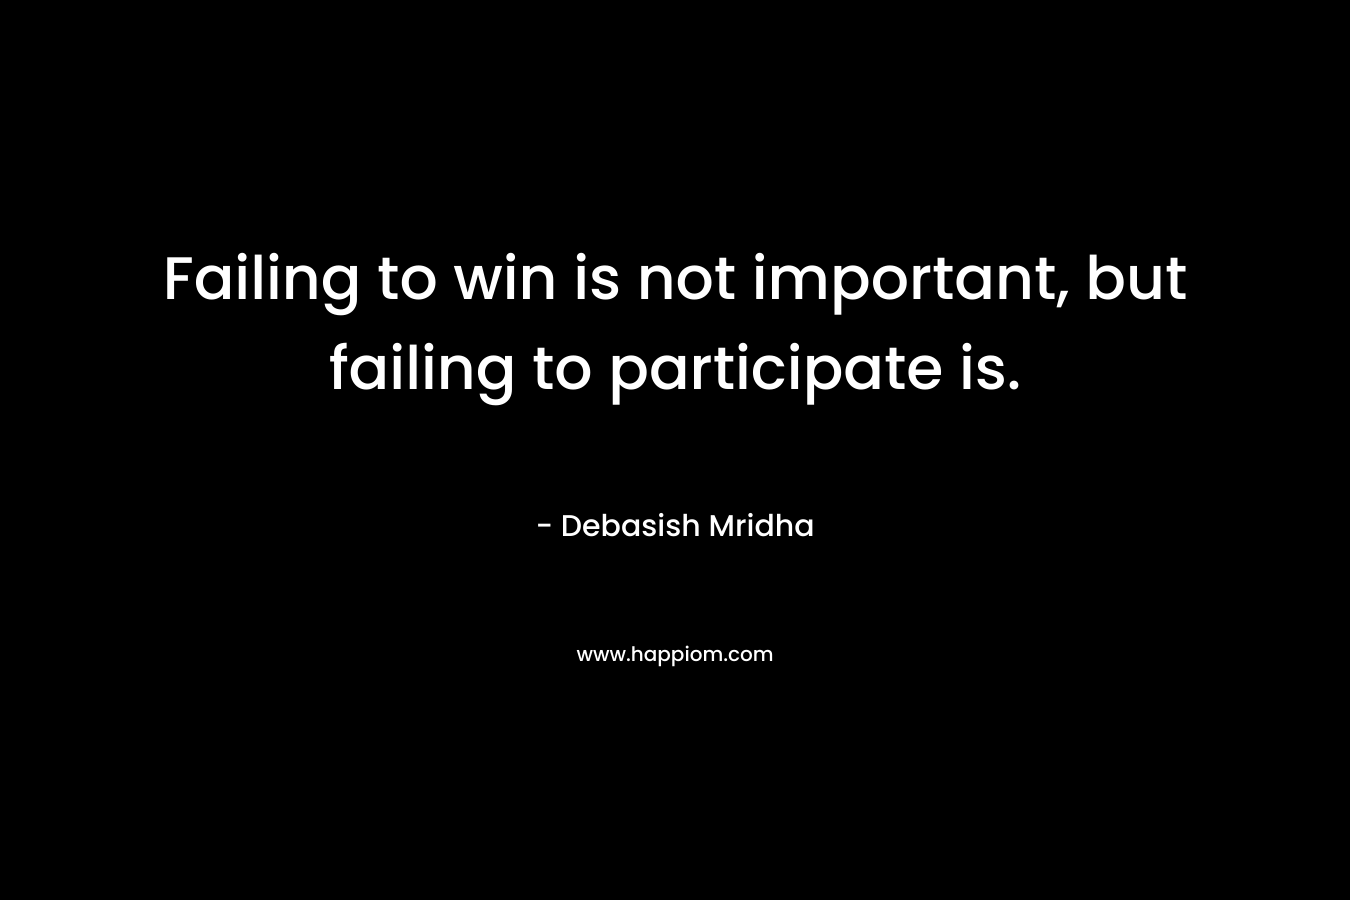 Failing to win is not important, but failing to participate is.